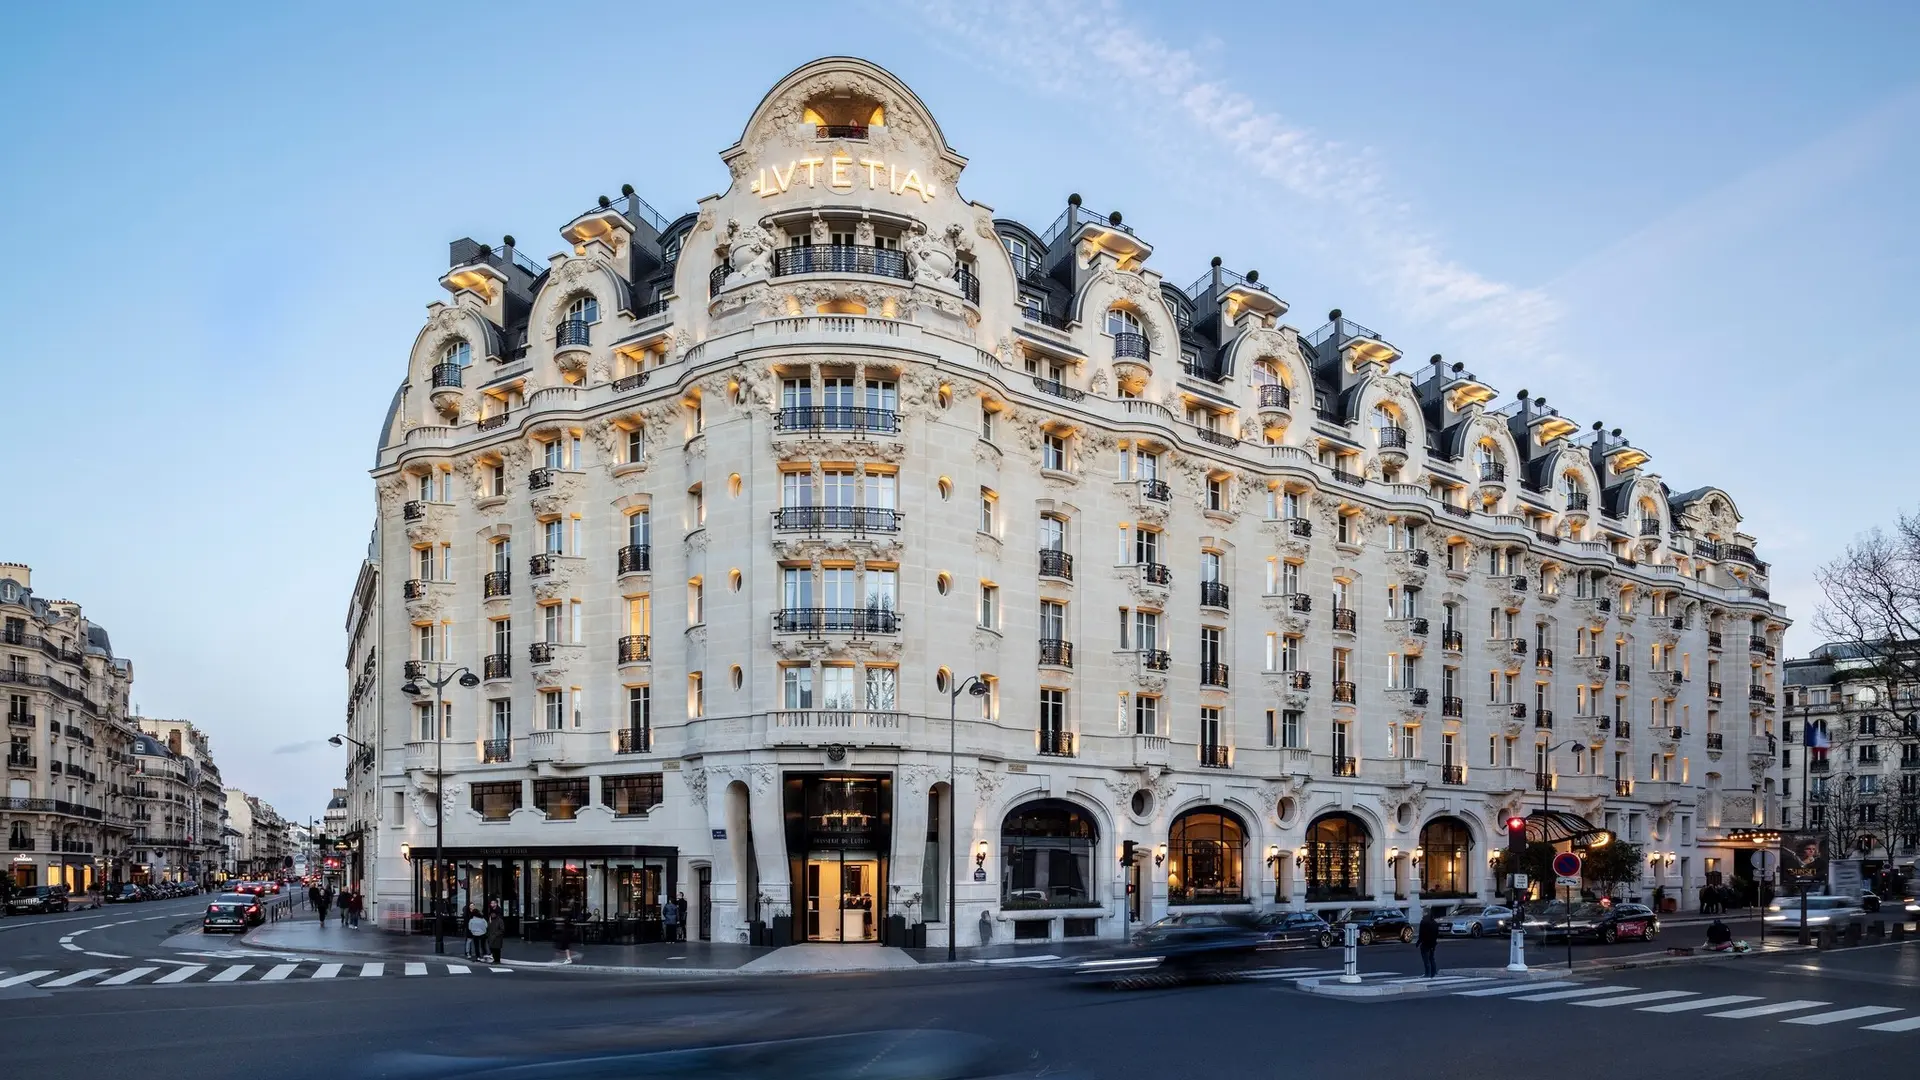 Outside view of Lutetia hotel paris seen from the street